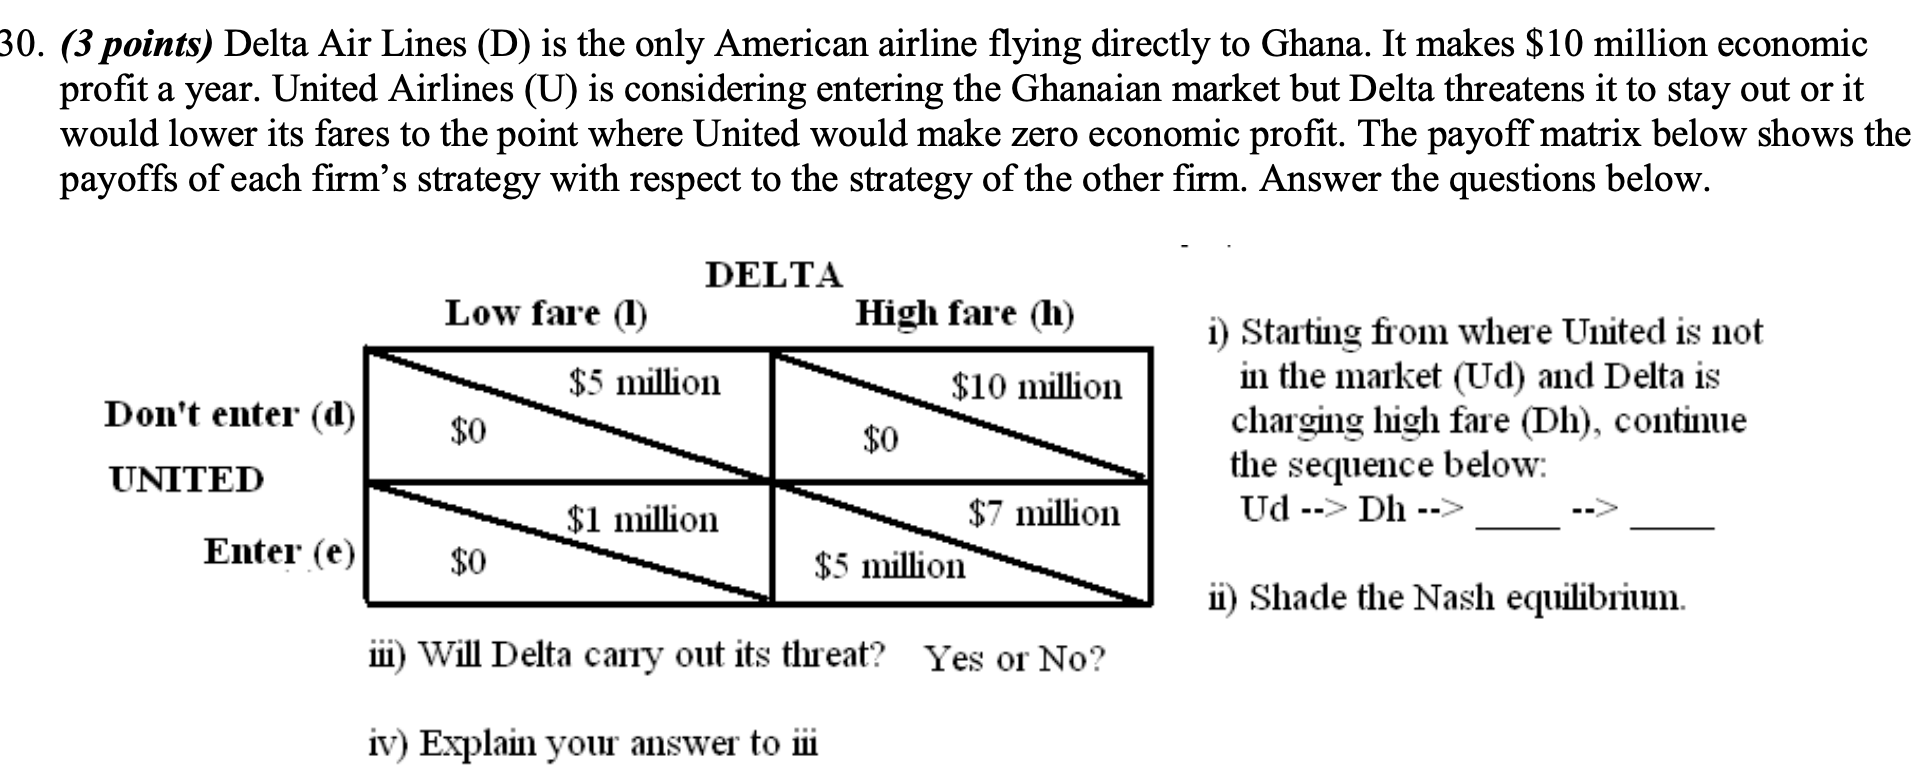 30. (3 points) Delta Air Lines (D) is the only American airline flying directly to Ghana. It makes $10 million economic
profi